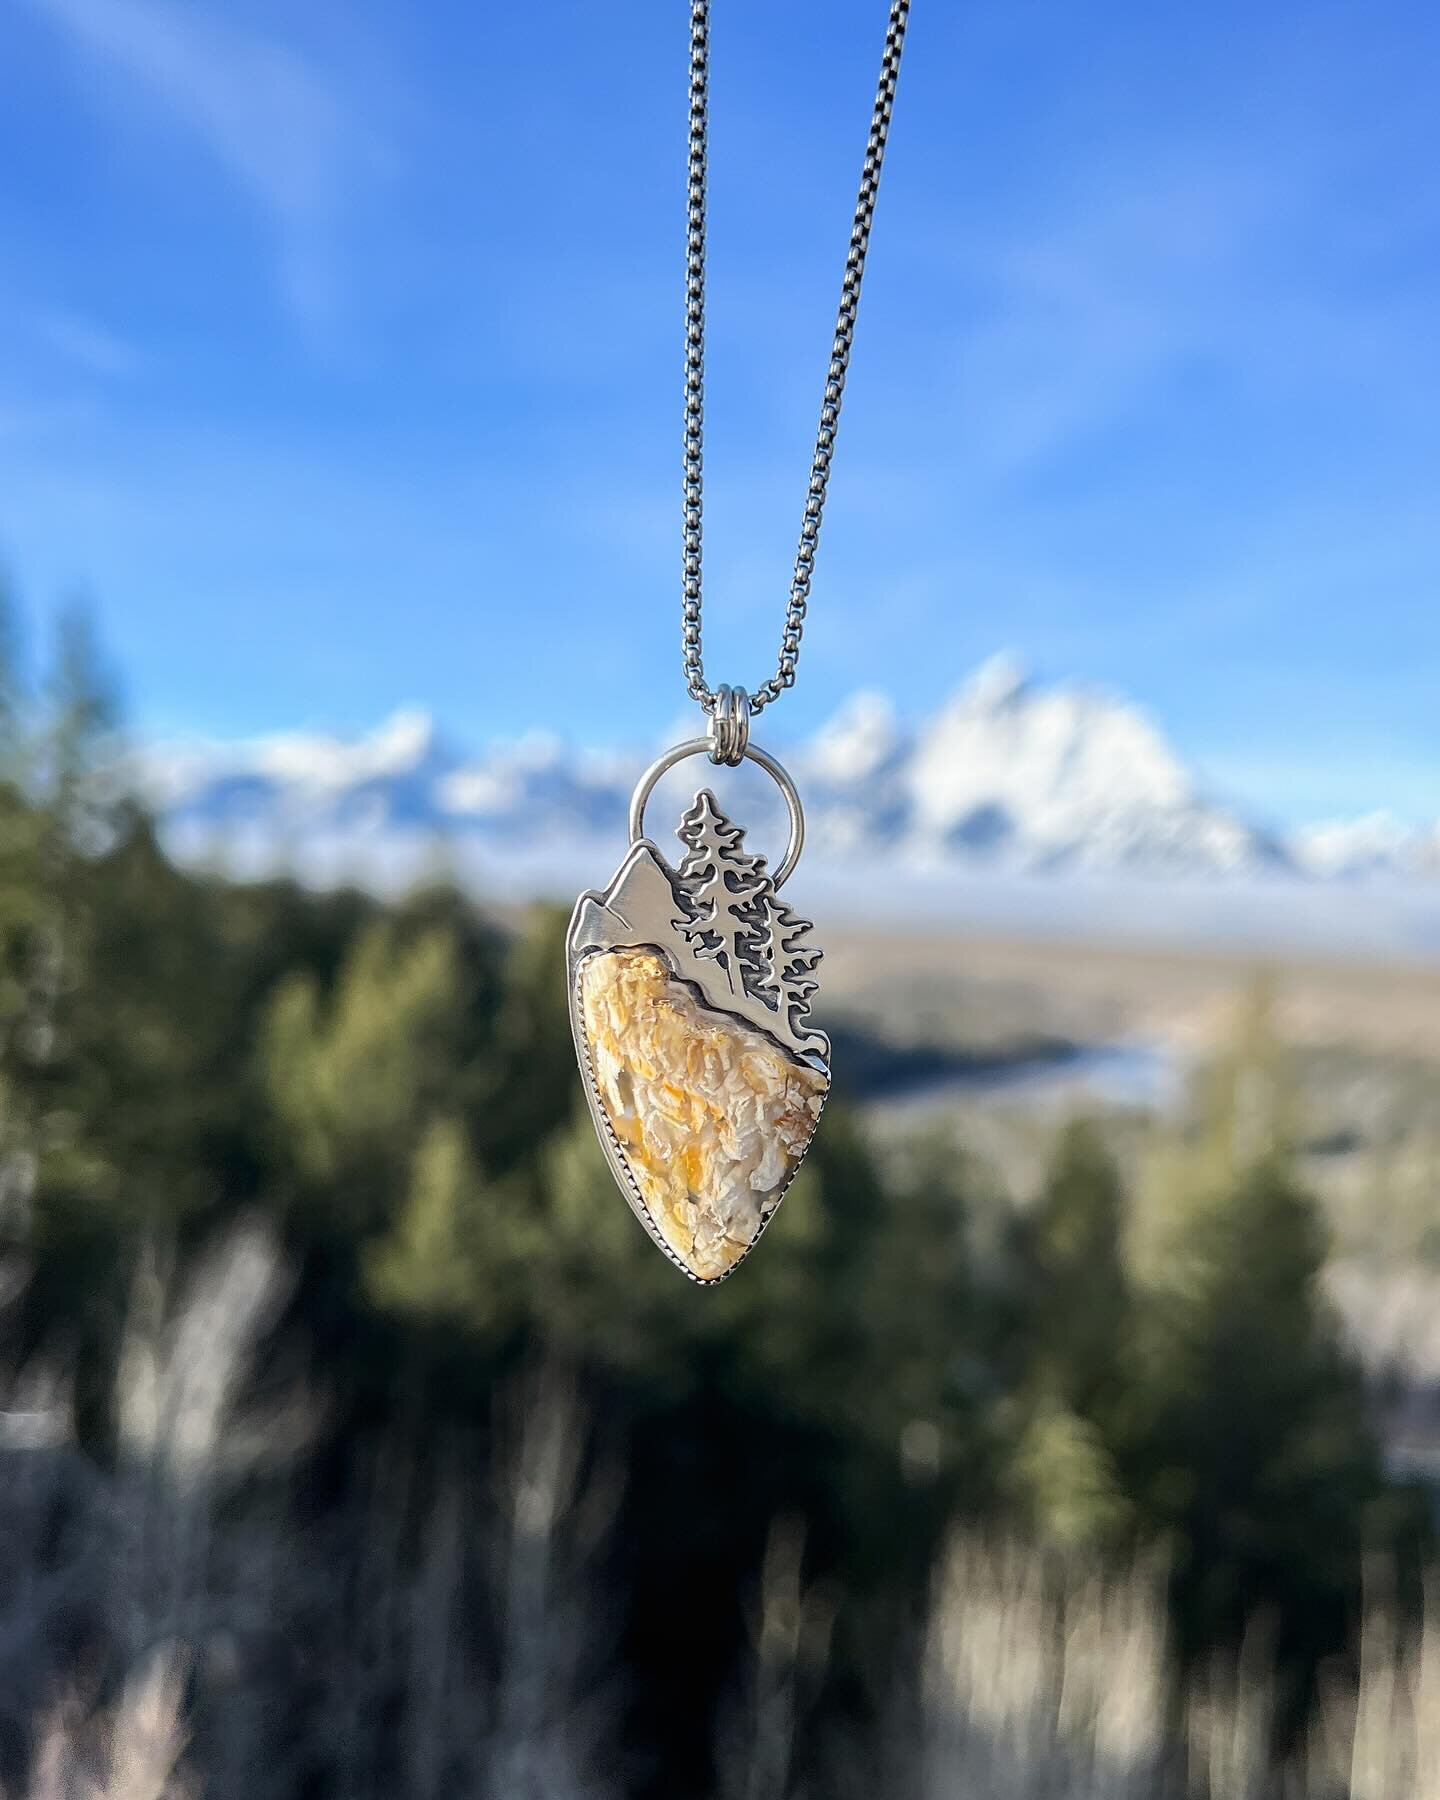 Gorgeous mountain conifer pendant featuring live-edge Howardite with a soaring eagle cutout on the backside. This babe will be ready for your next adventure Nov. 24th at 5:30pm MST, link in bio.